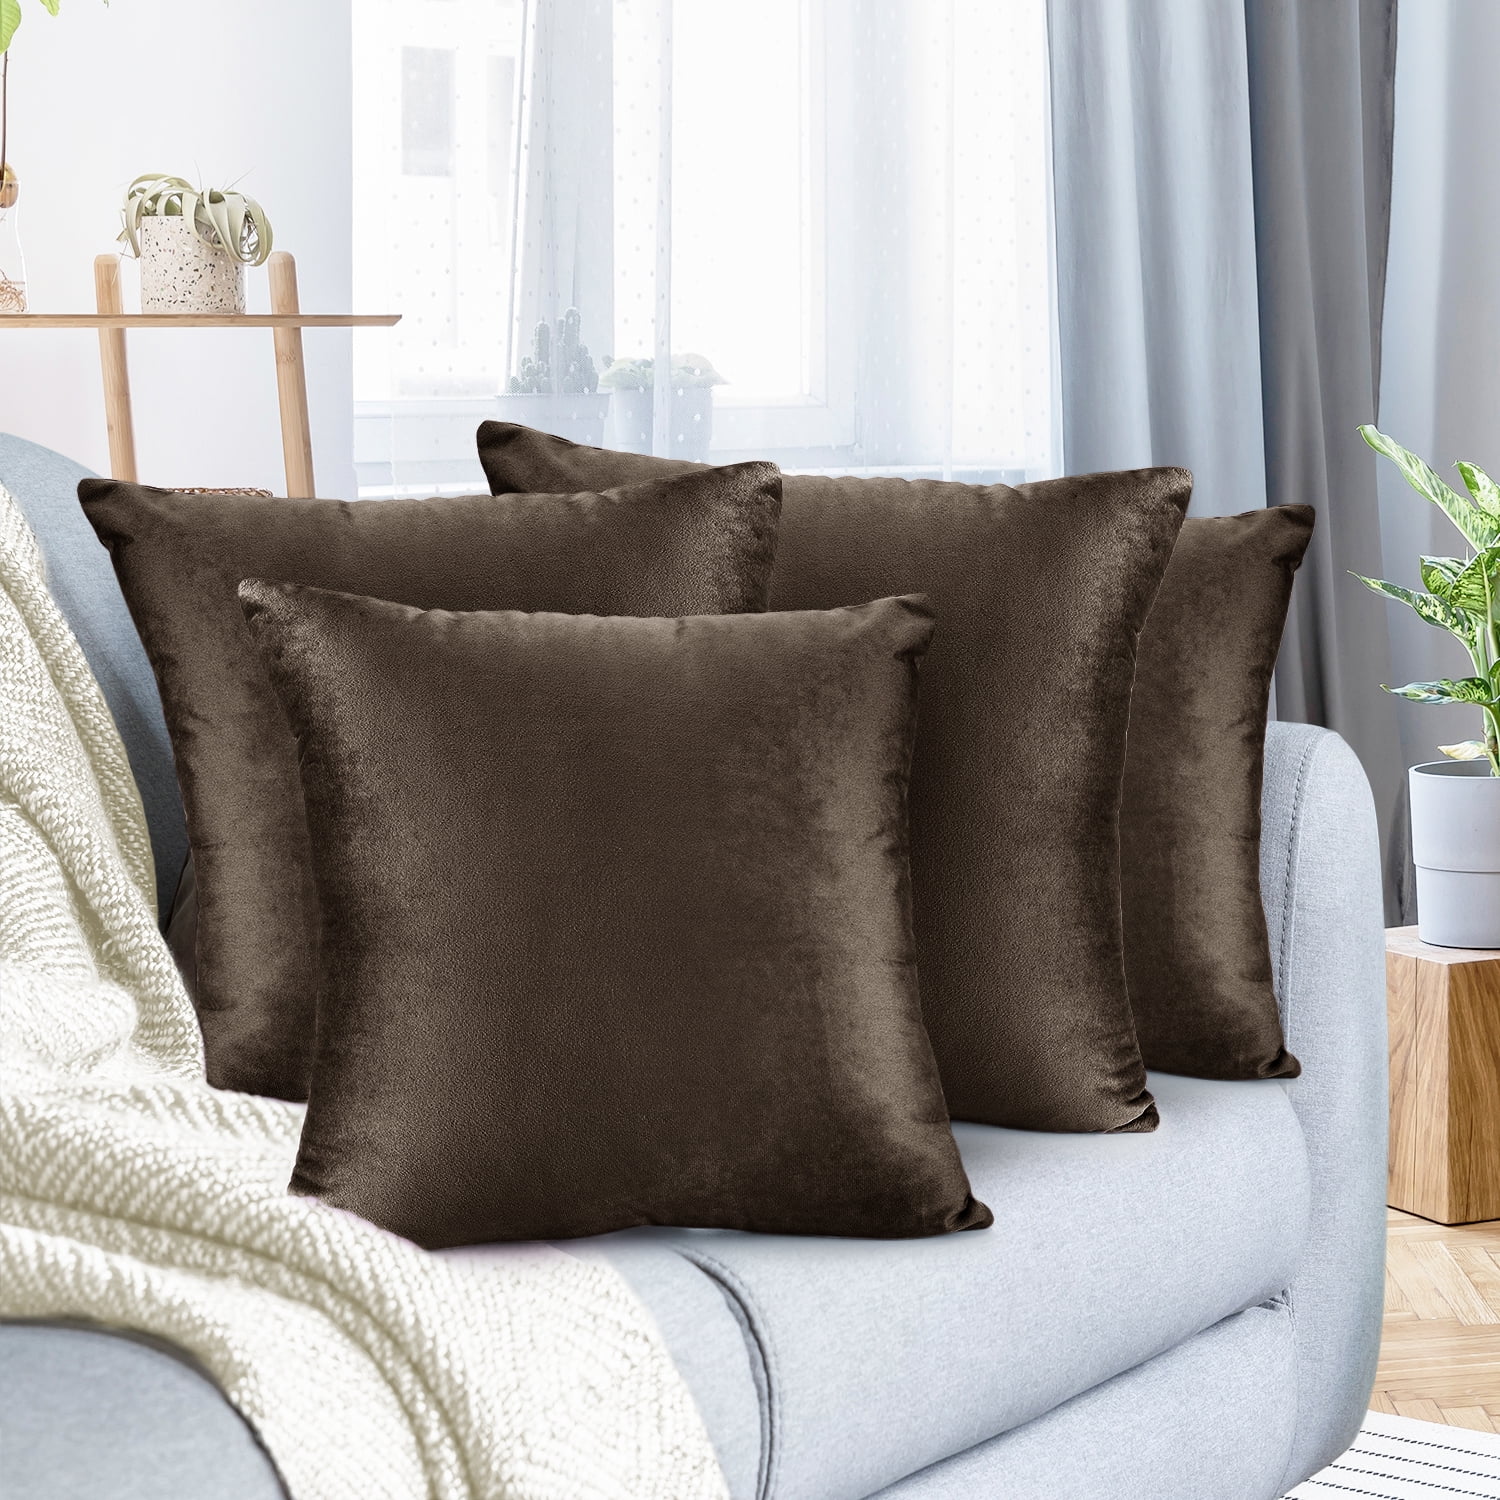 Pack of 4 Velvet Throw Pillow Covers Decorative Soft Square Cushion ...